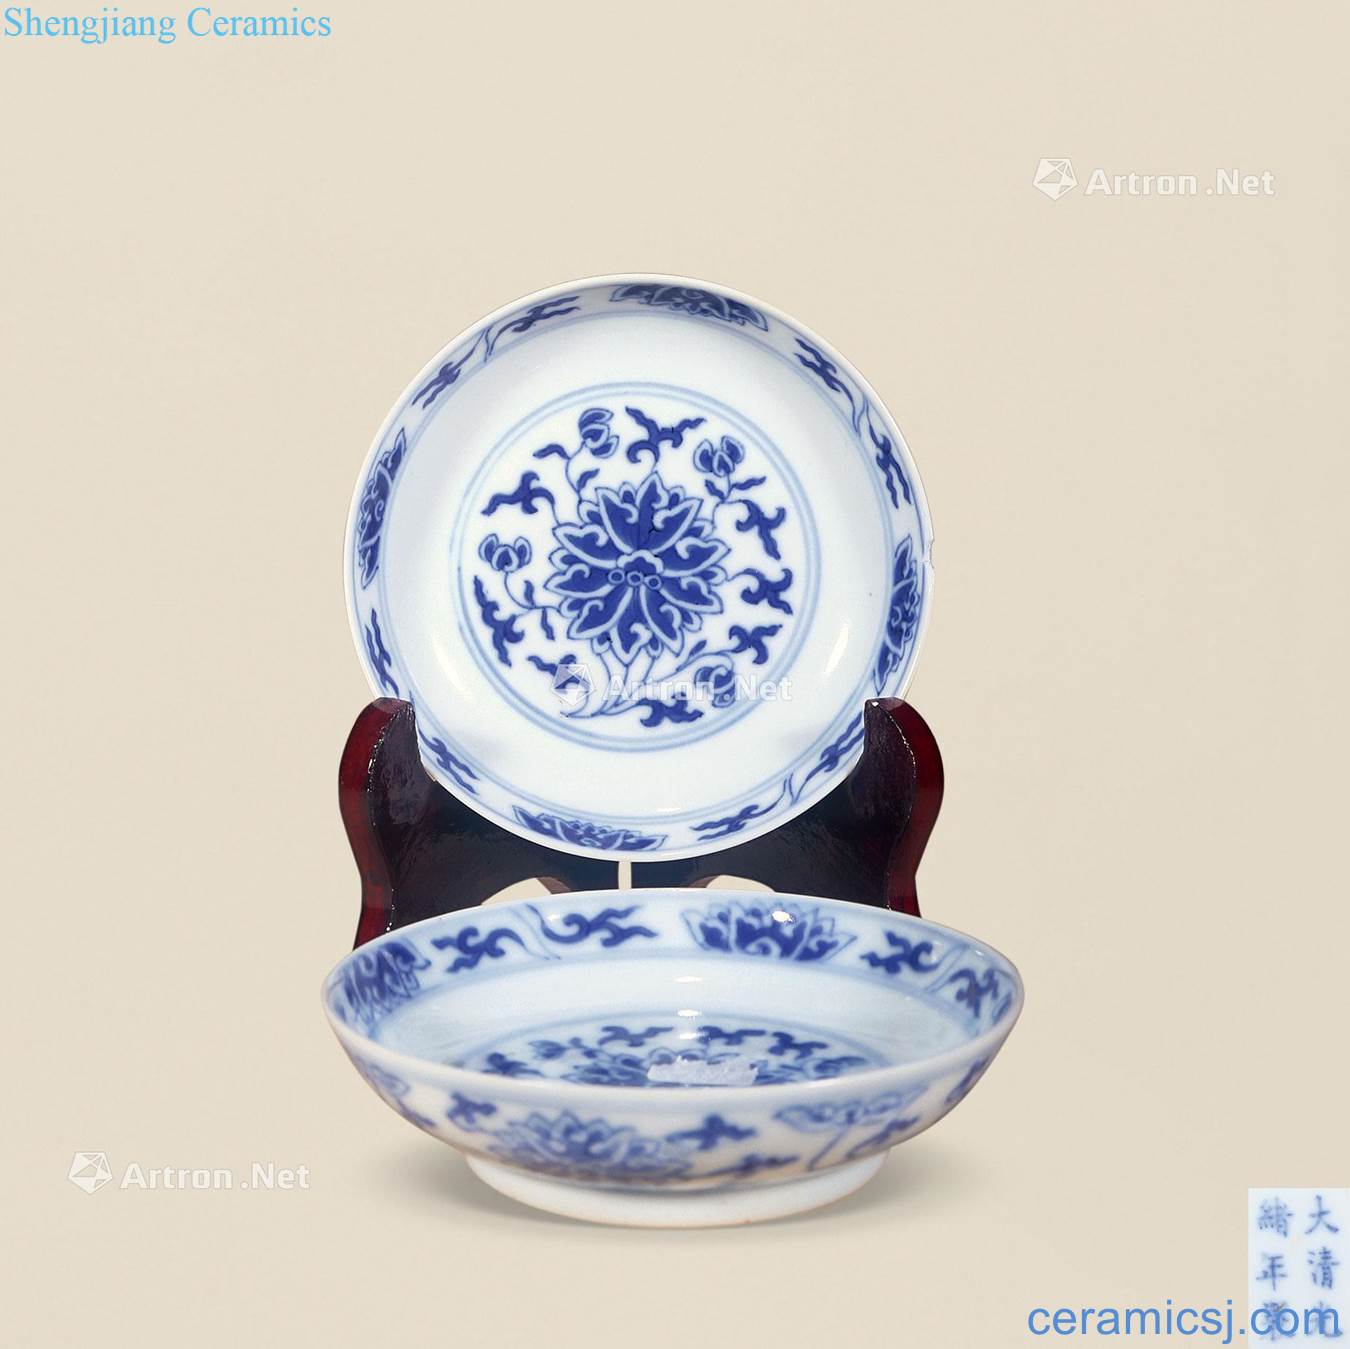 Qing guangxu Blue and white lotus design plate (a)